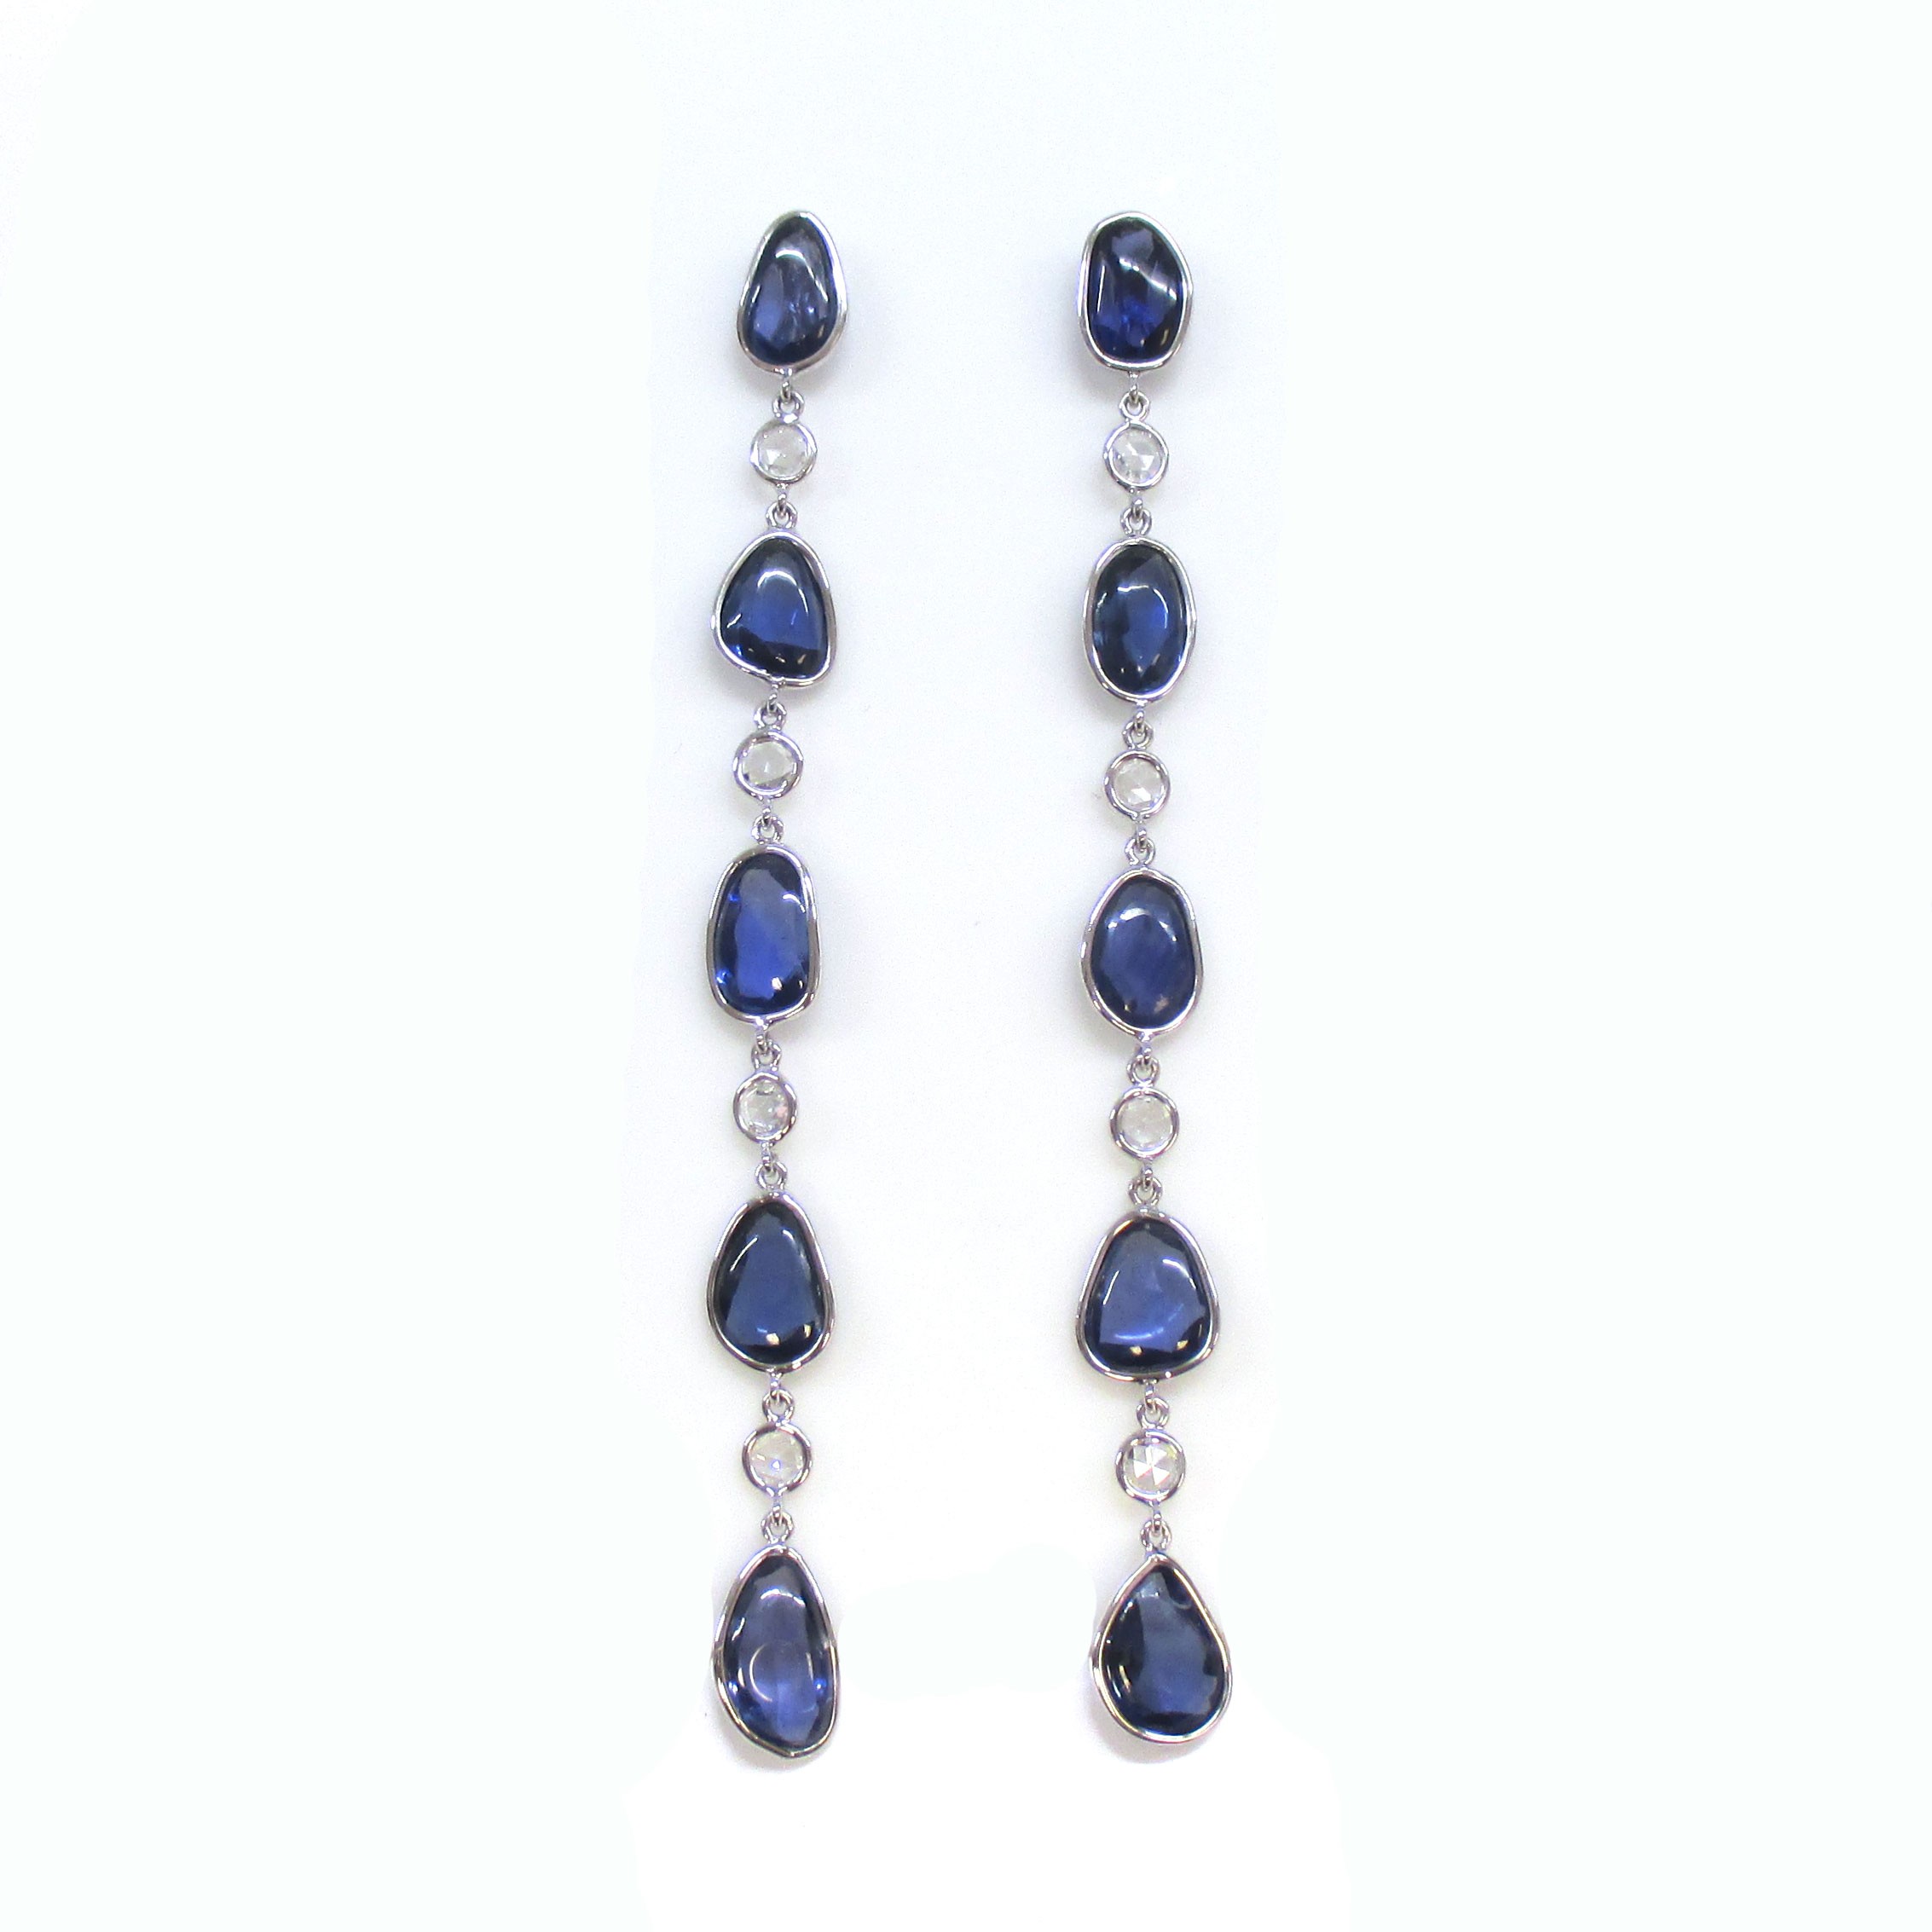 Sapphire and diamond earrings in Palm Desert on El Paseo